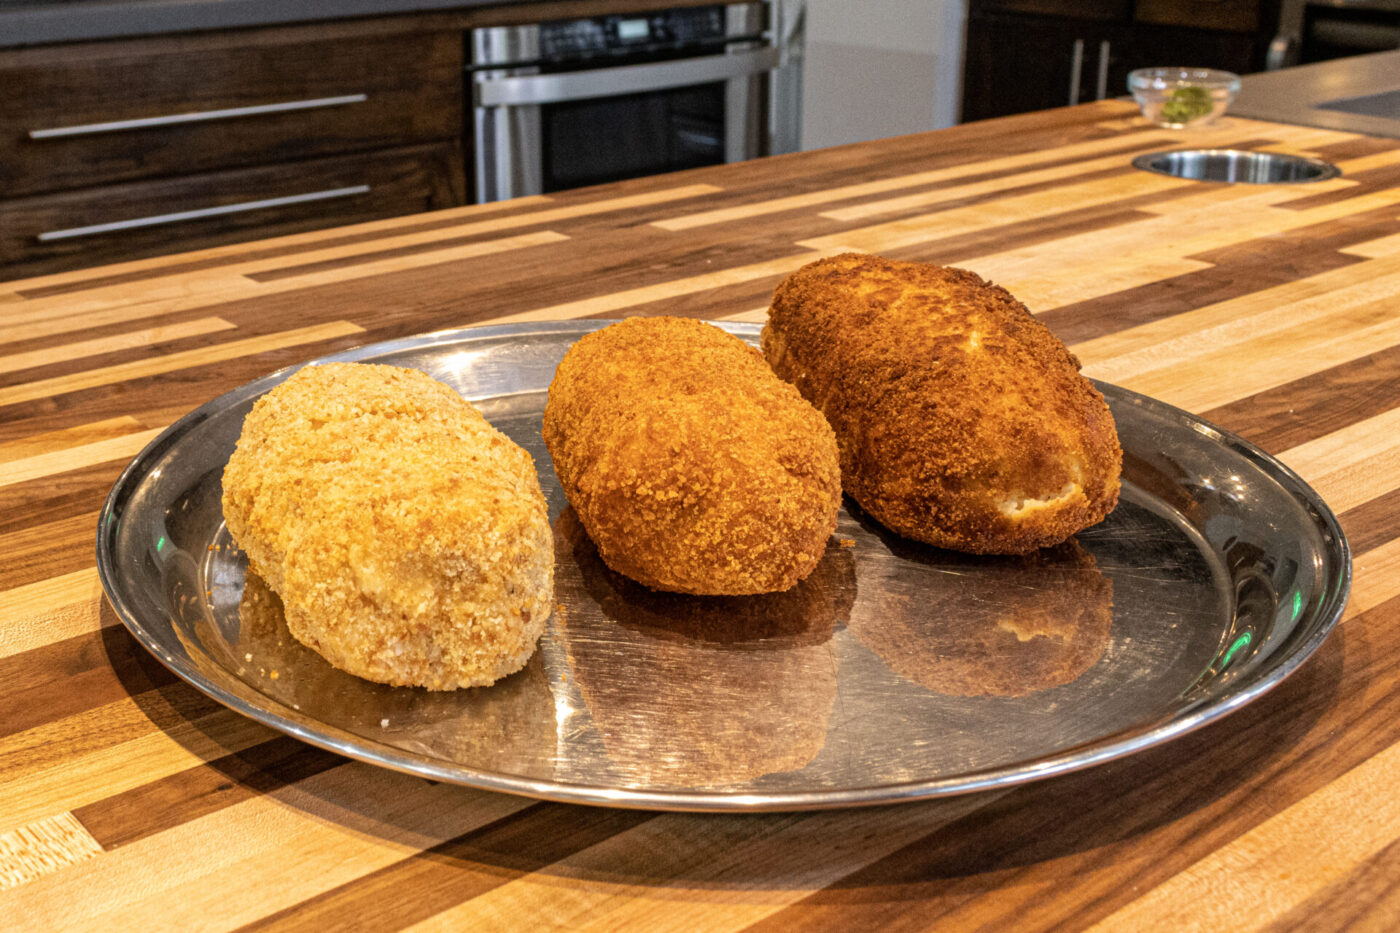 From left to right: Cordon bleu prepared in the air fryer, deep fryer, and shallow fried.